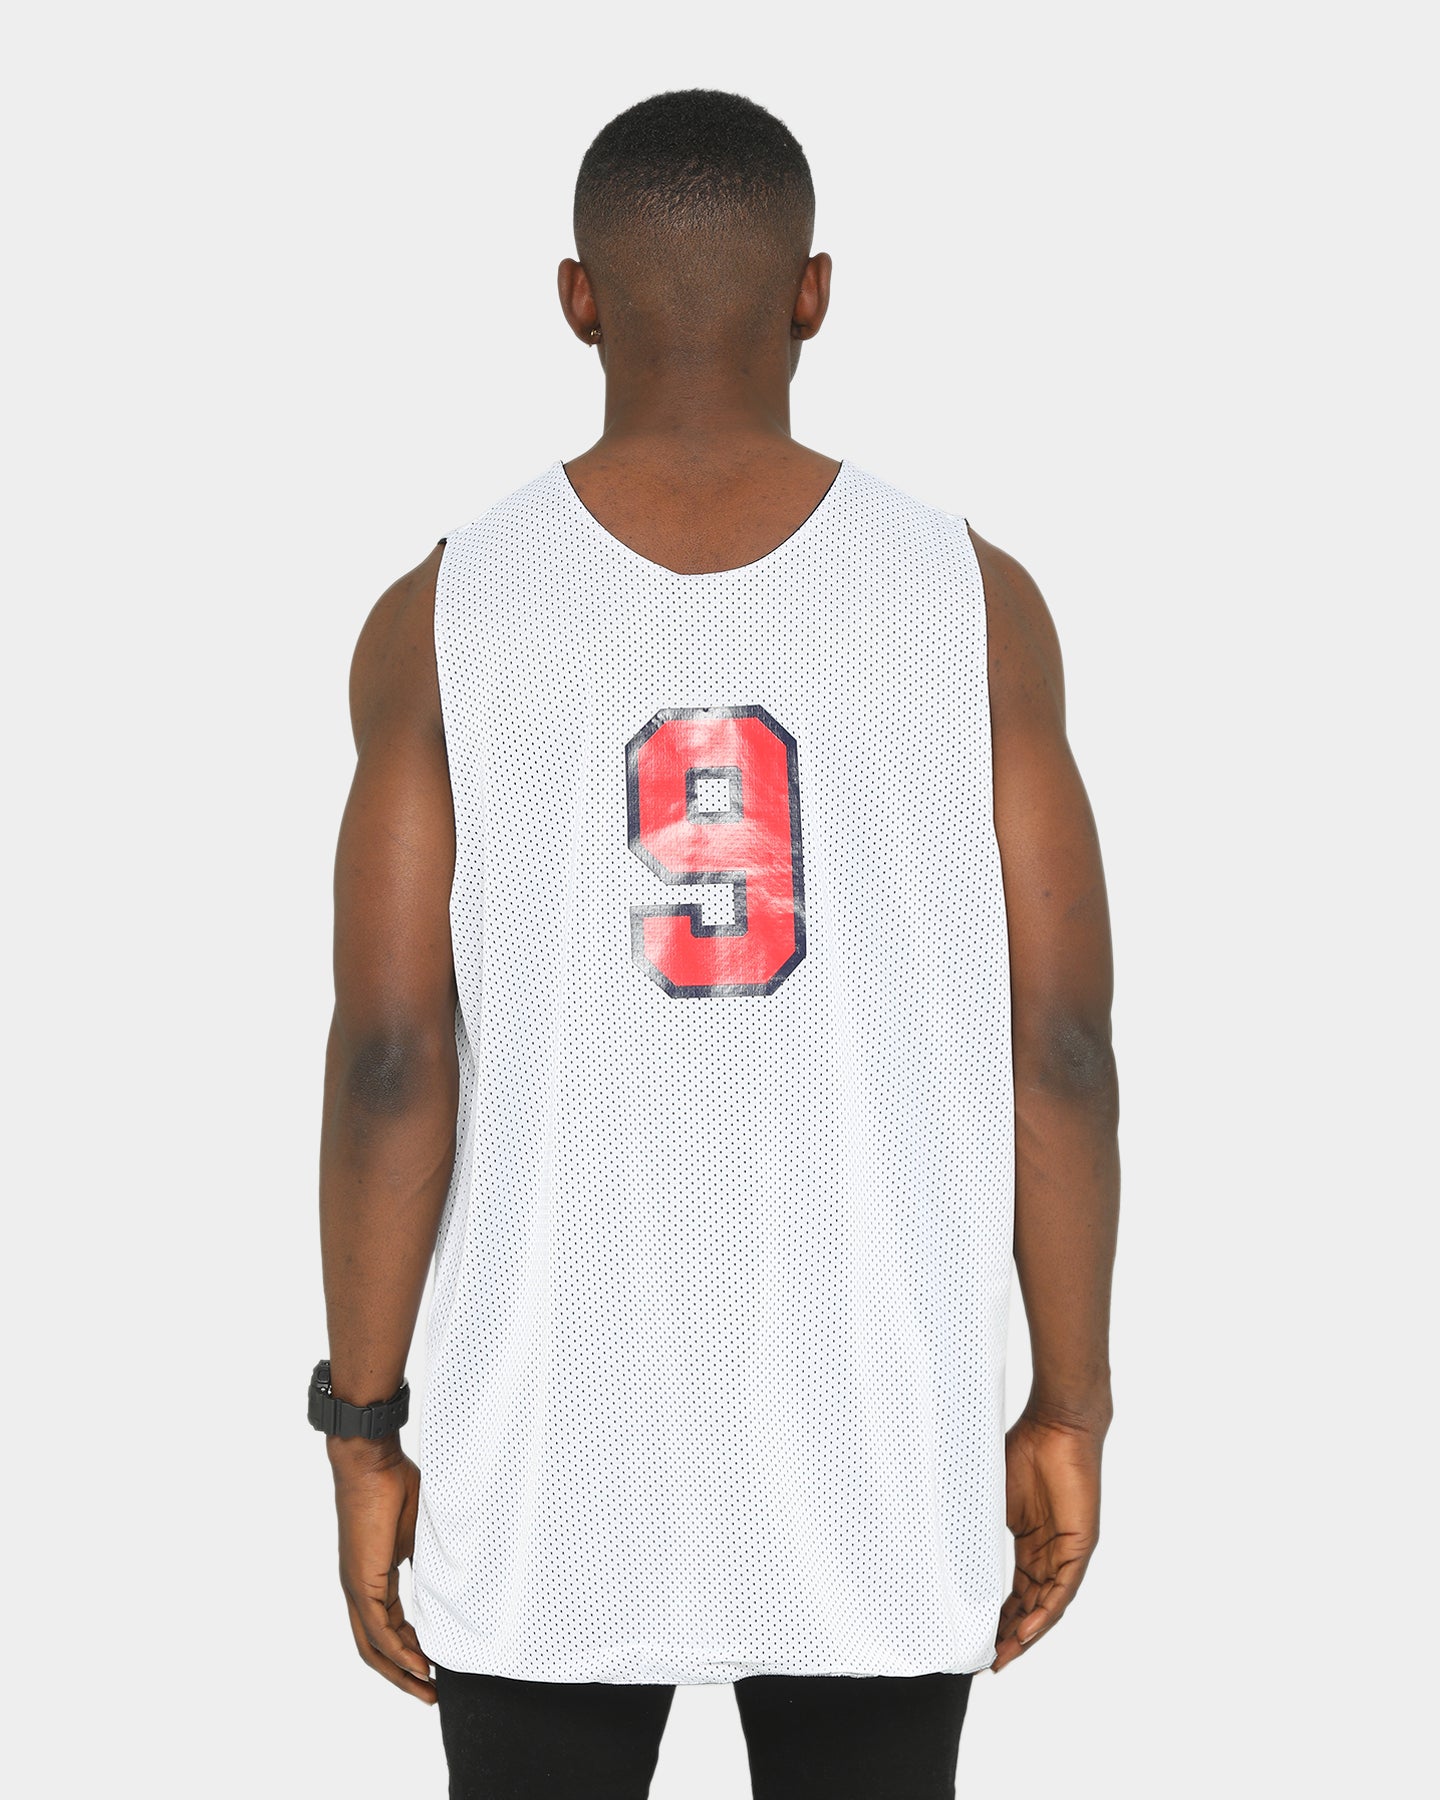 mitchell and ness practice jersey